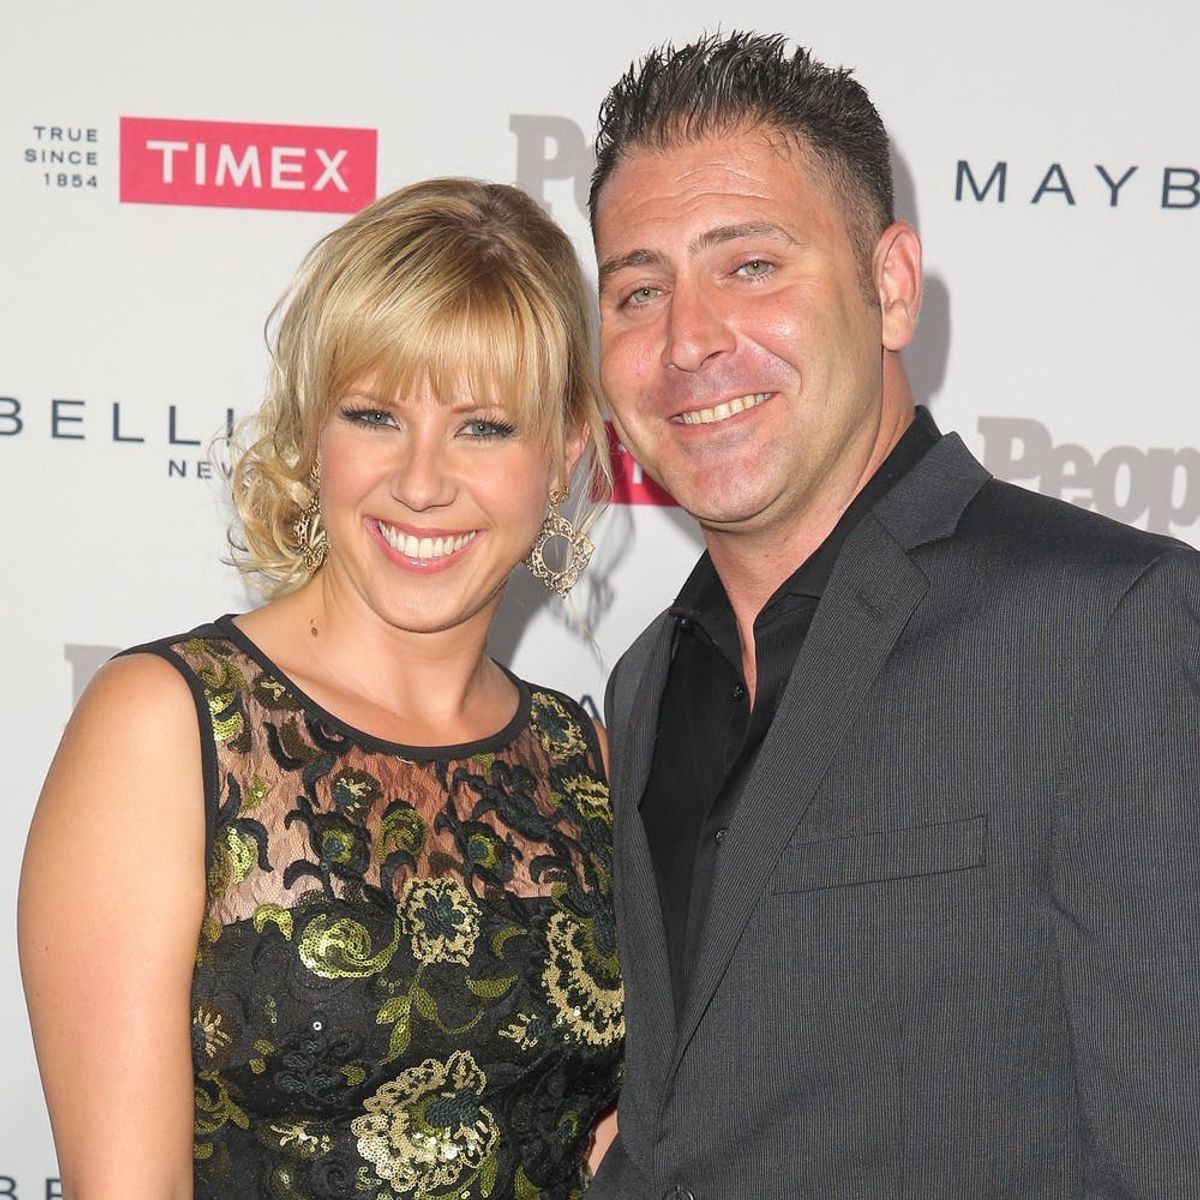 Fuller House’s Jodie Sweetin Is No Longer Engaged